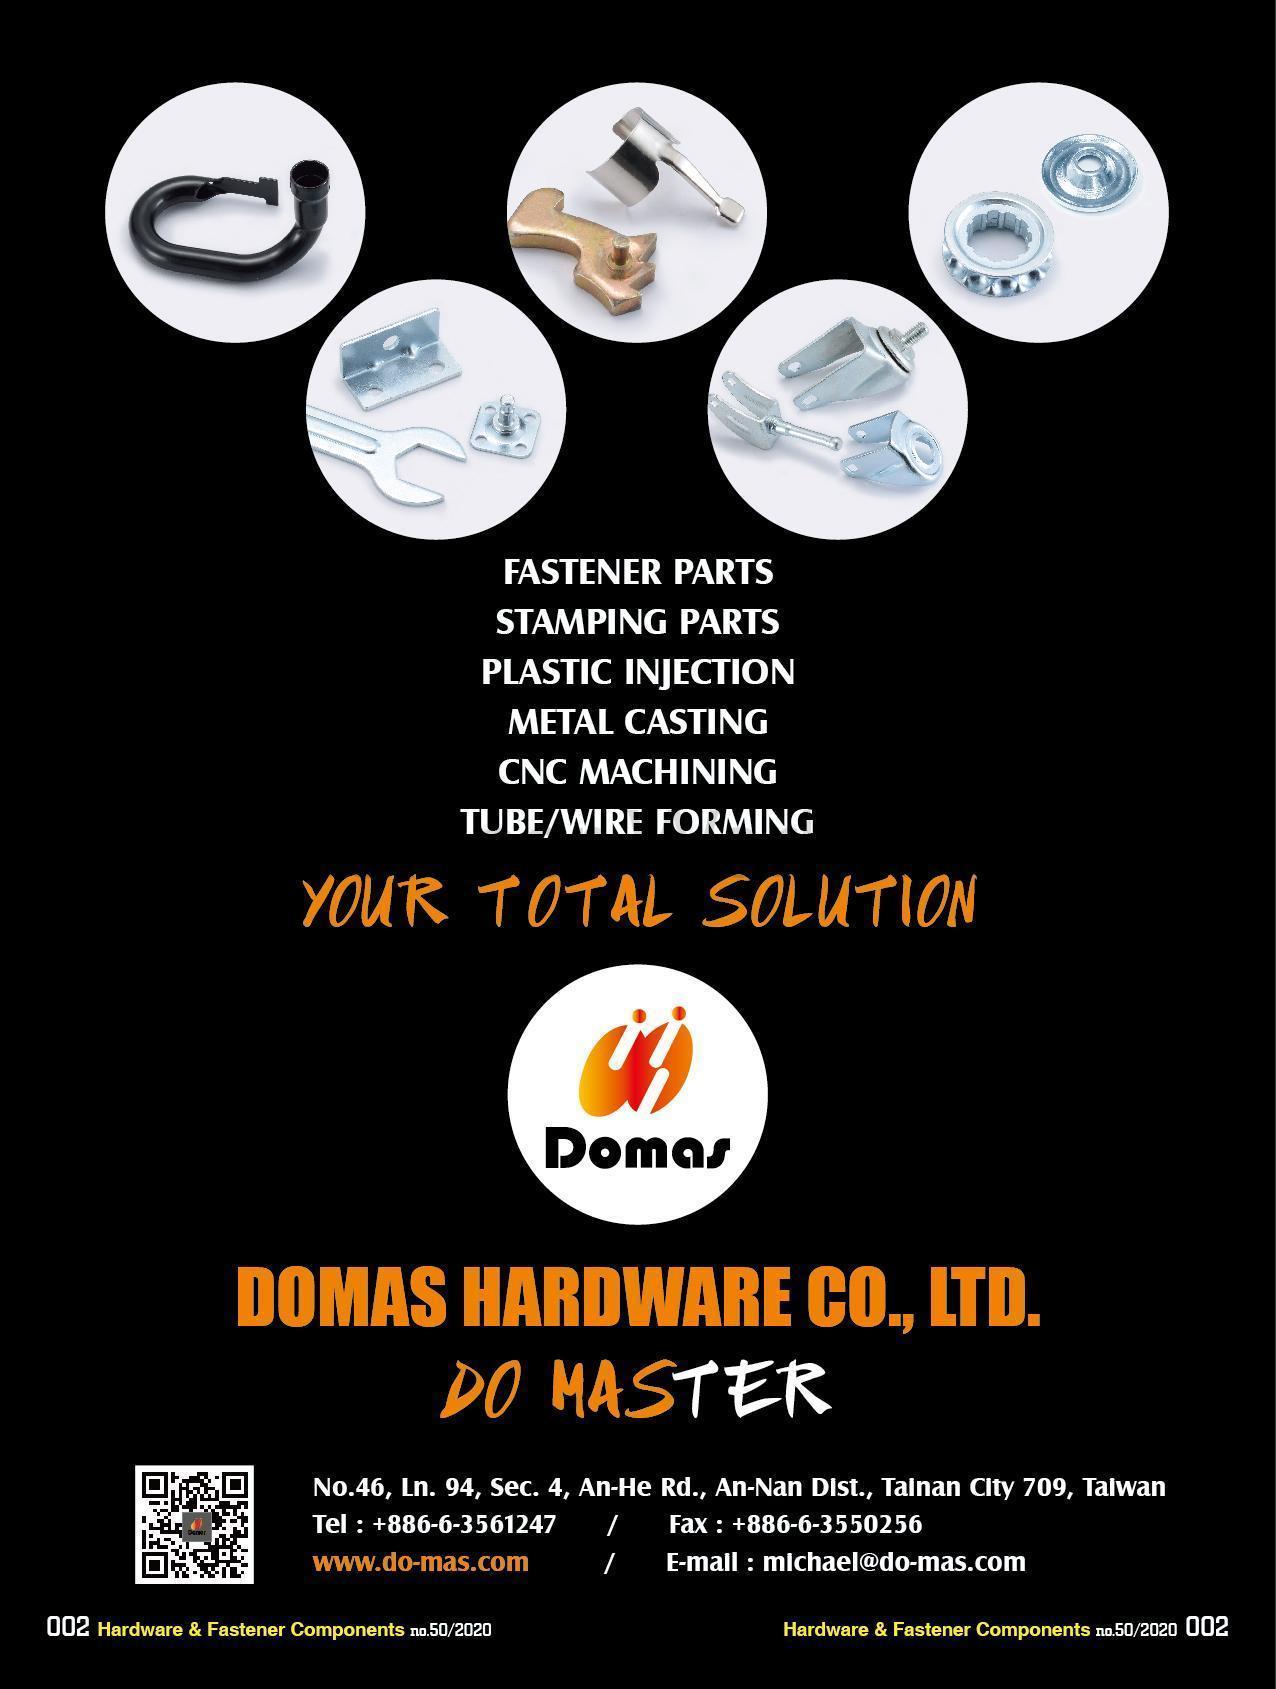 DOMAS HARDWARE CO., LTD. , Fastener Parts, Stamping Parts, Plastic Injection, Metal Casting, CNC Machining, Tube/Wire Forming , Stamped Parts